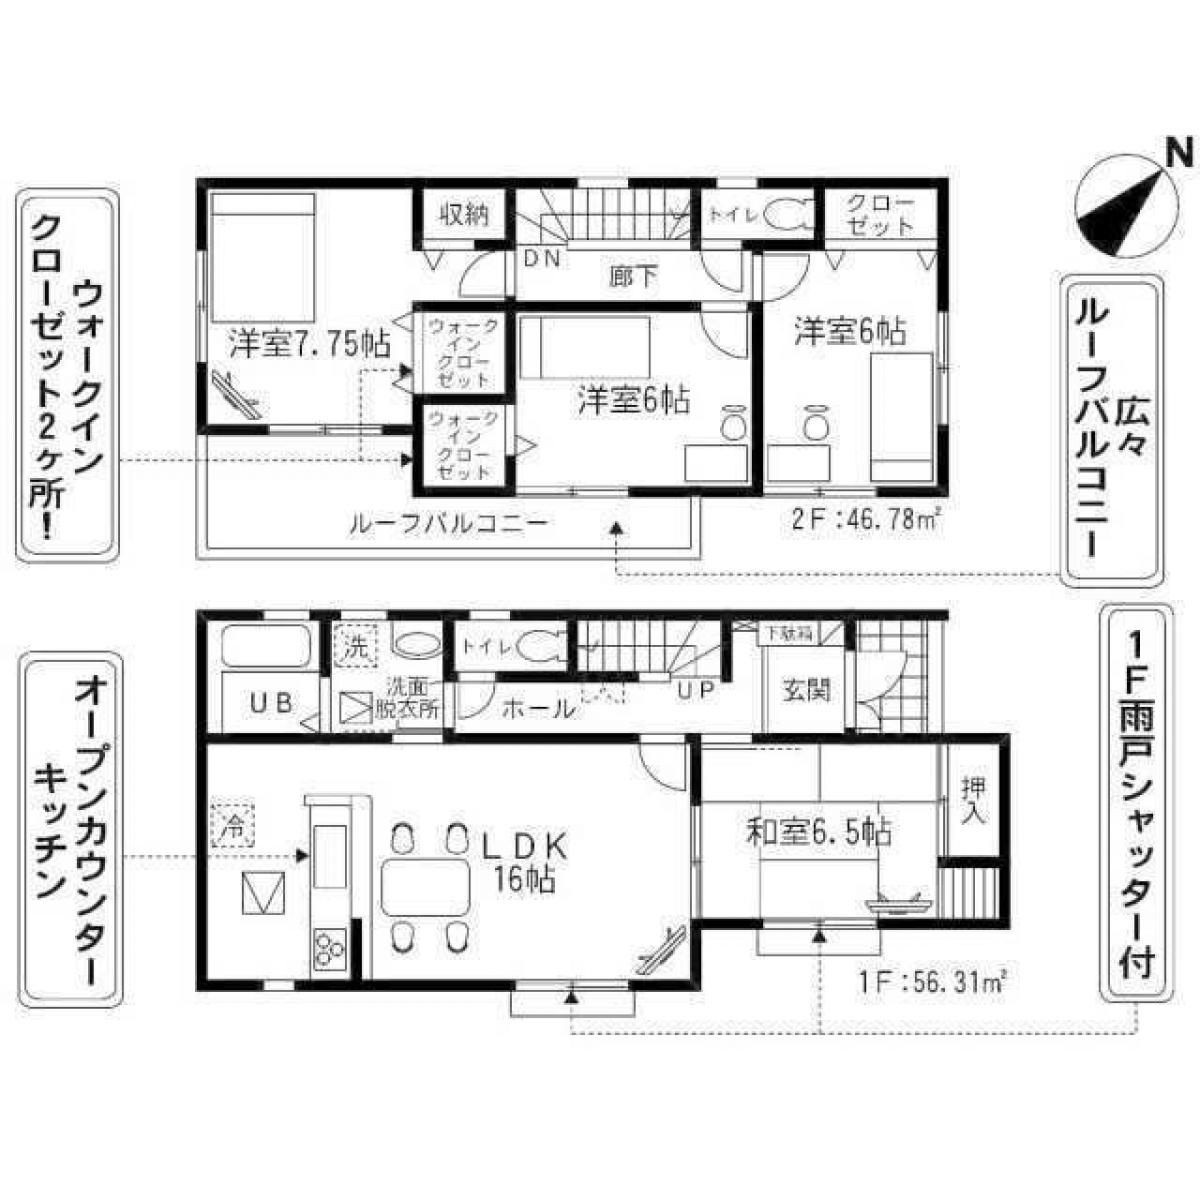 Picture of Home For Sale in Inzai Shi, Chiba, Japan